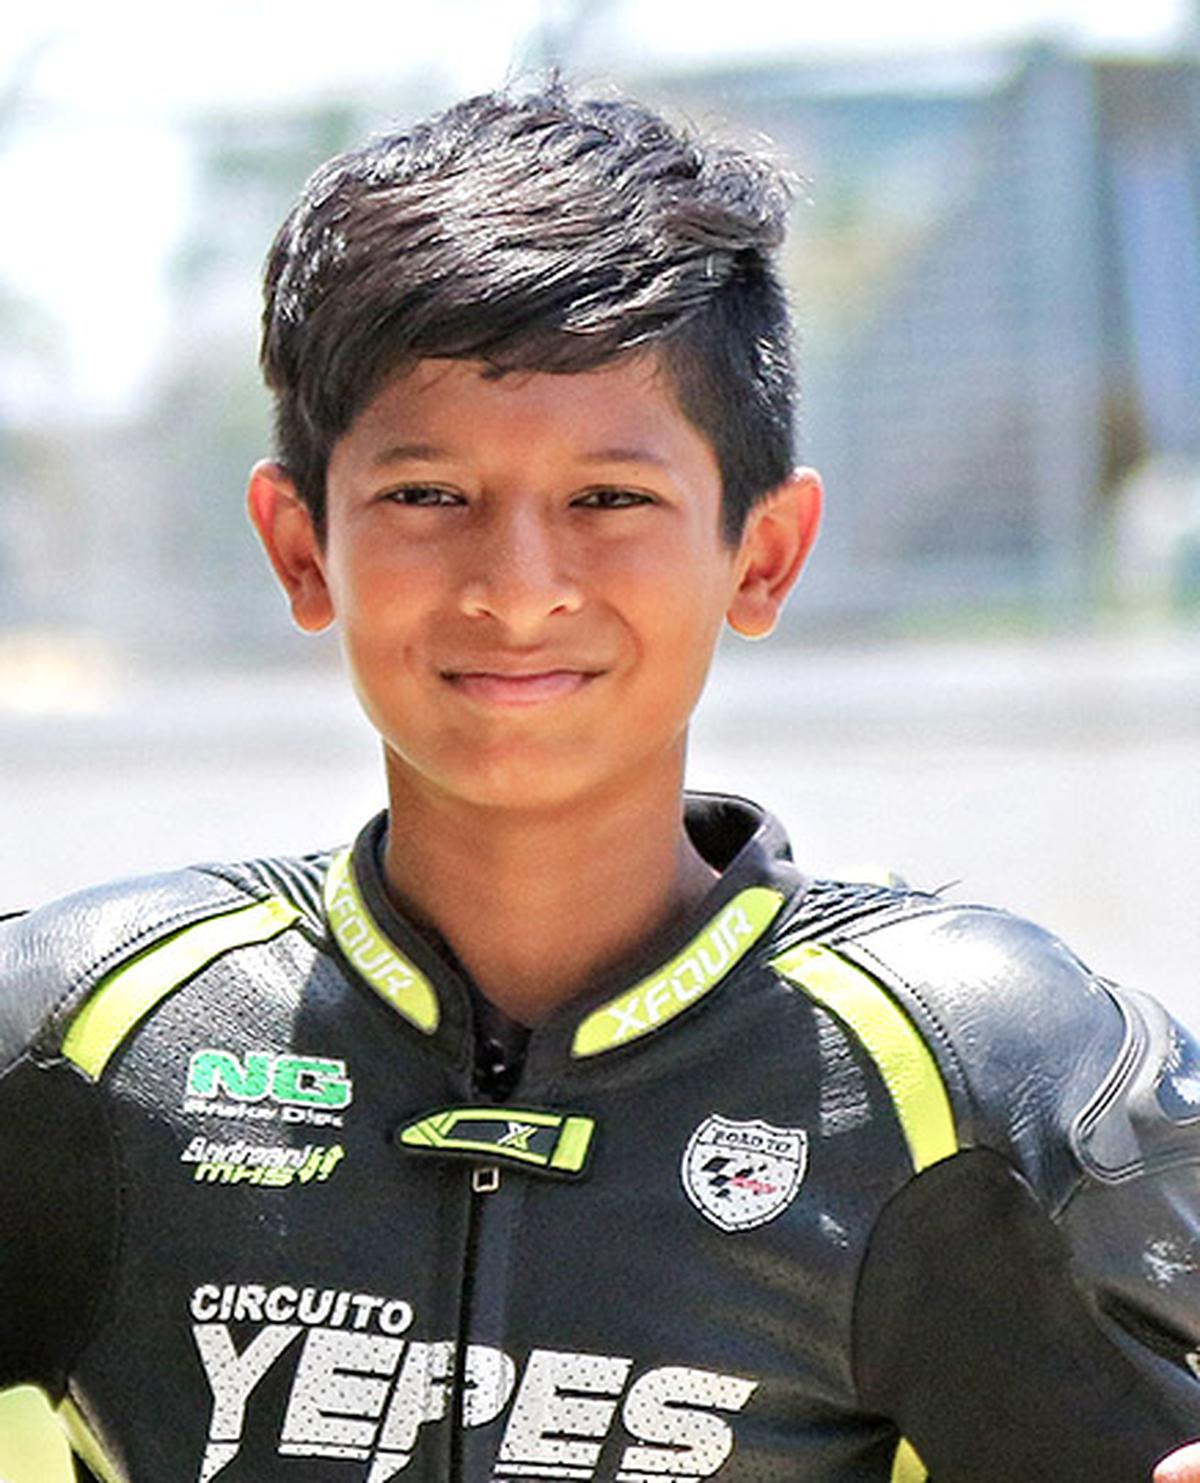 13-year-old Indian youth bike rider dies in accident during race